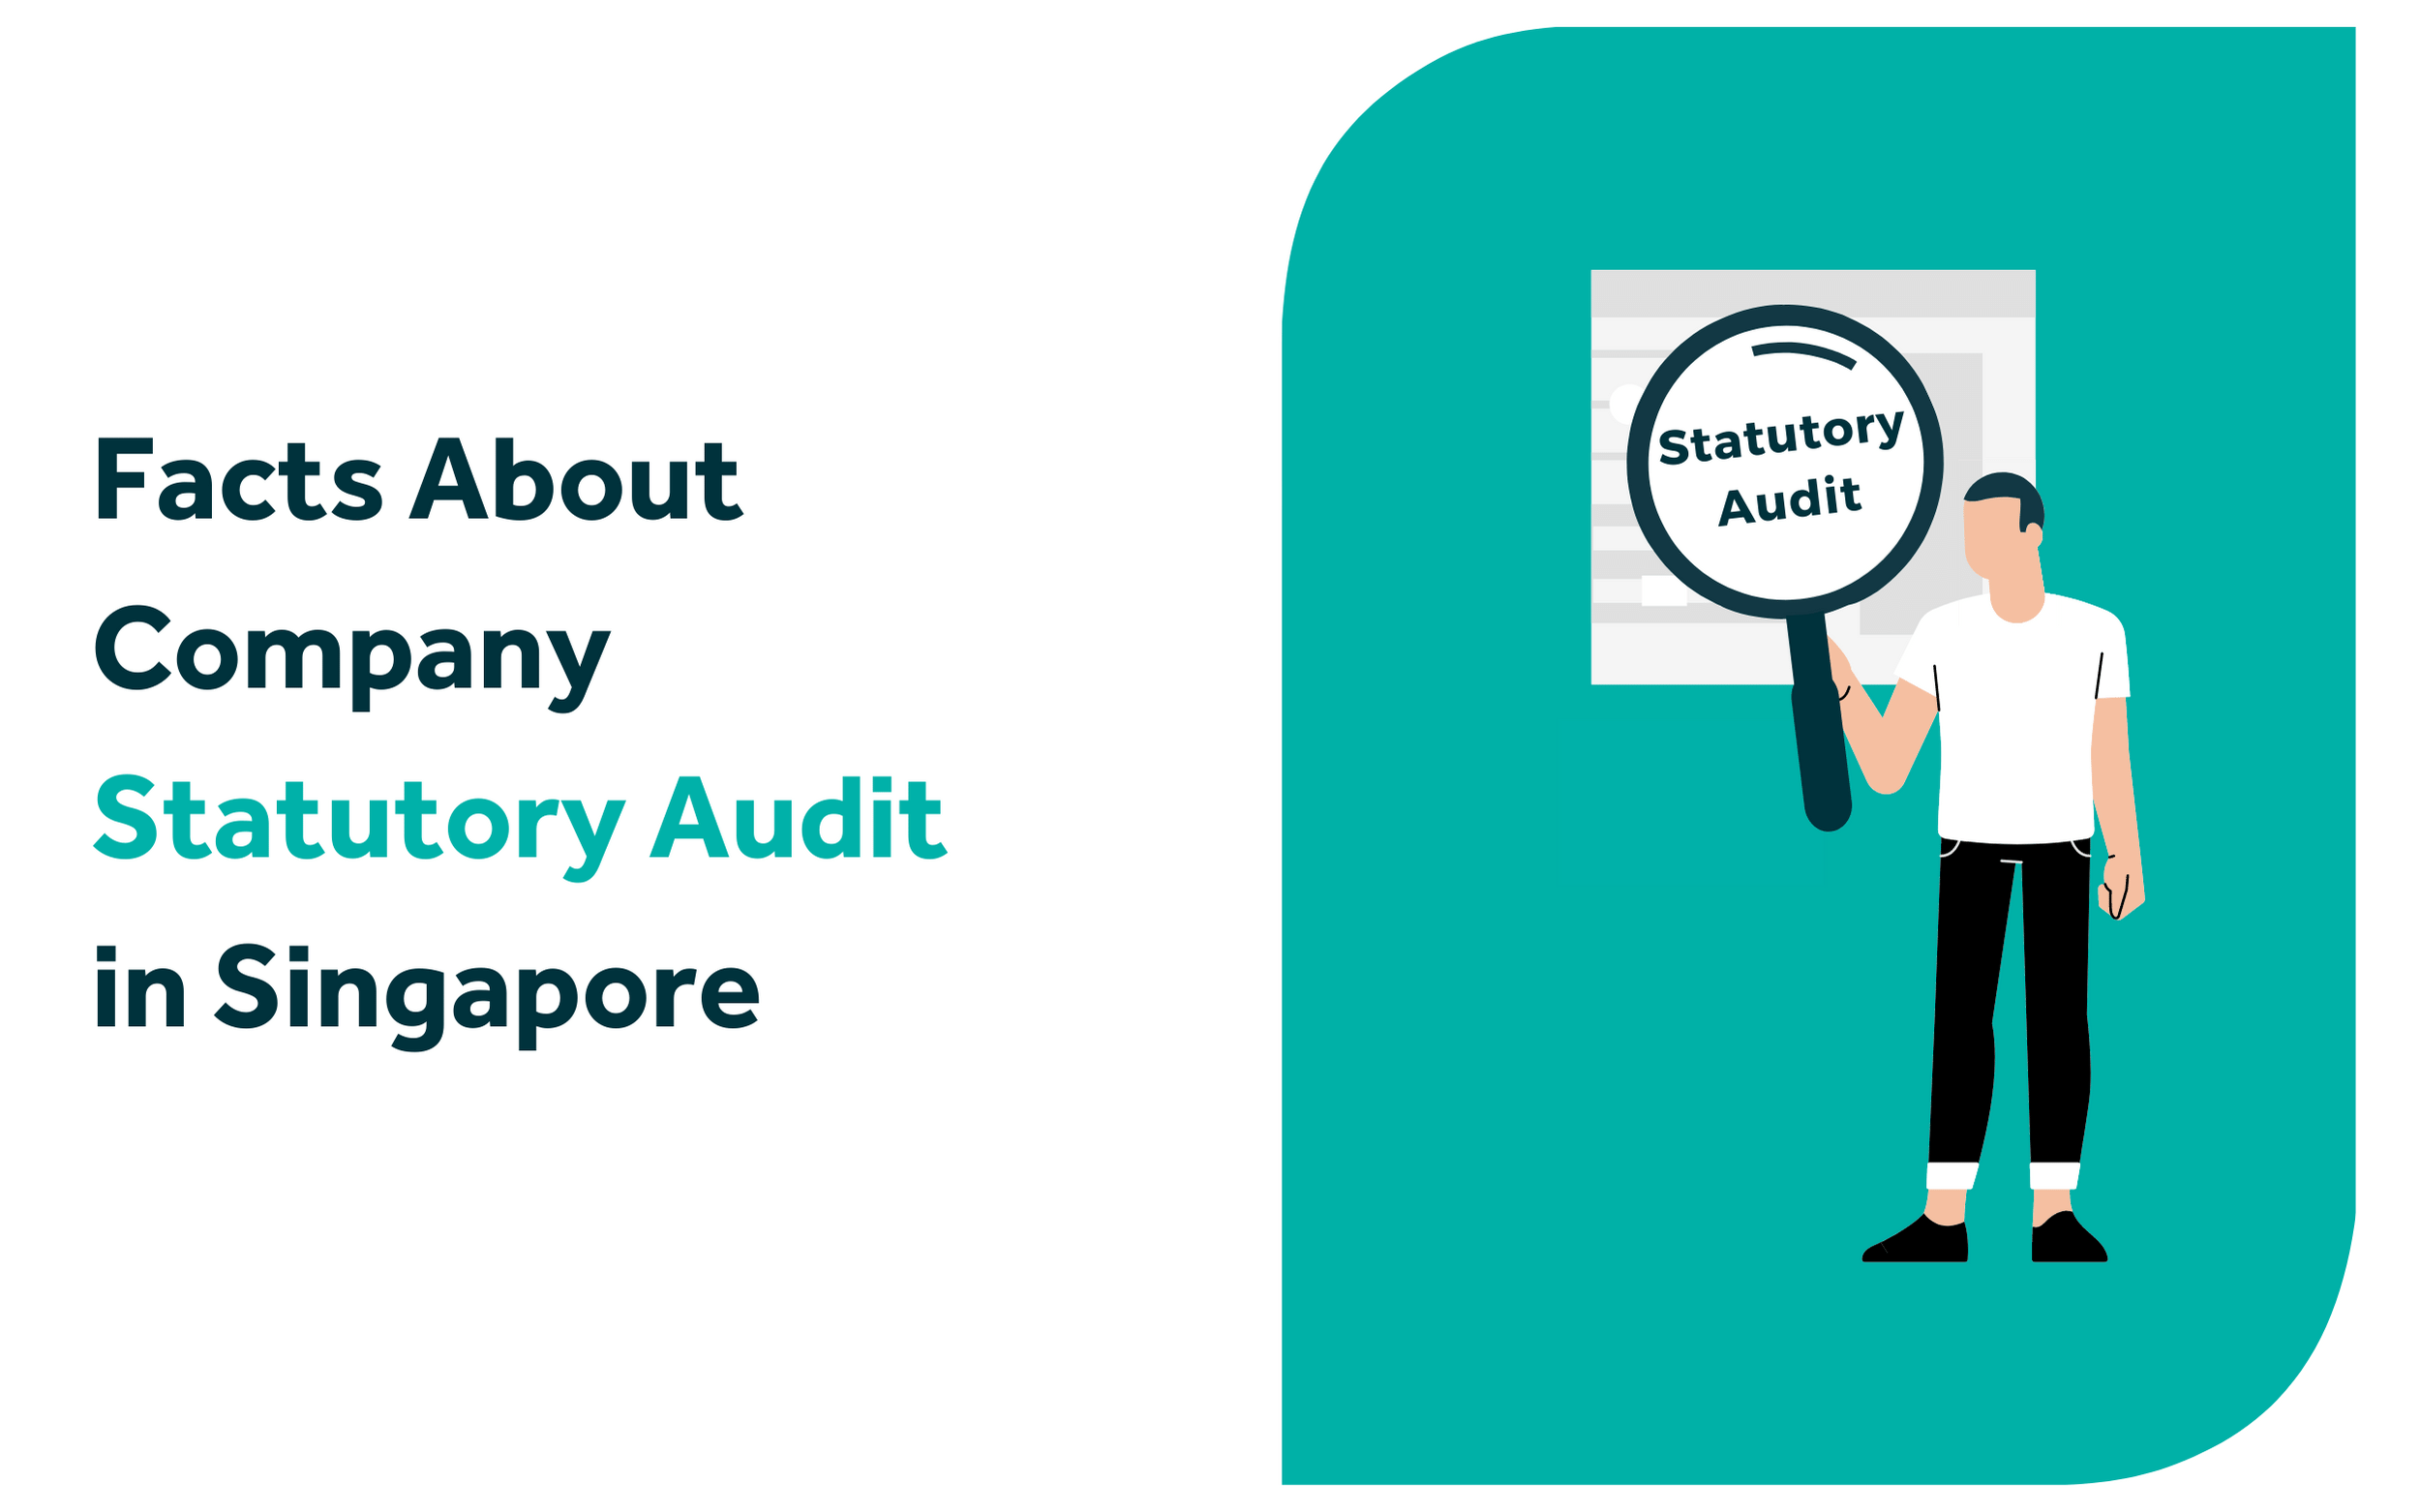 Facts About Company Statutory Audit in Singapore